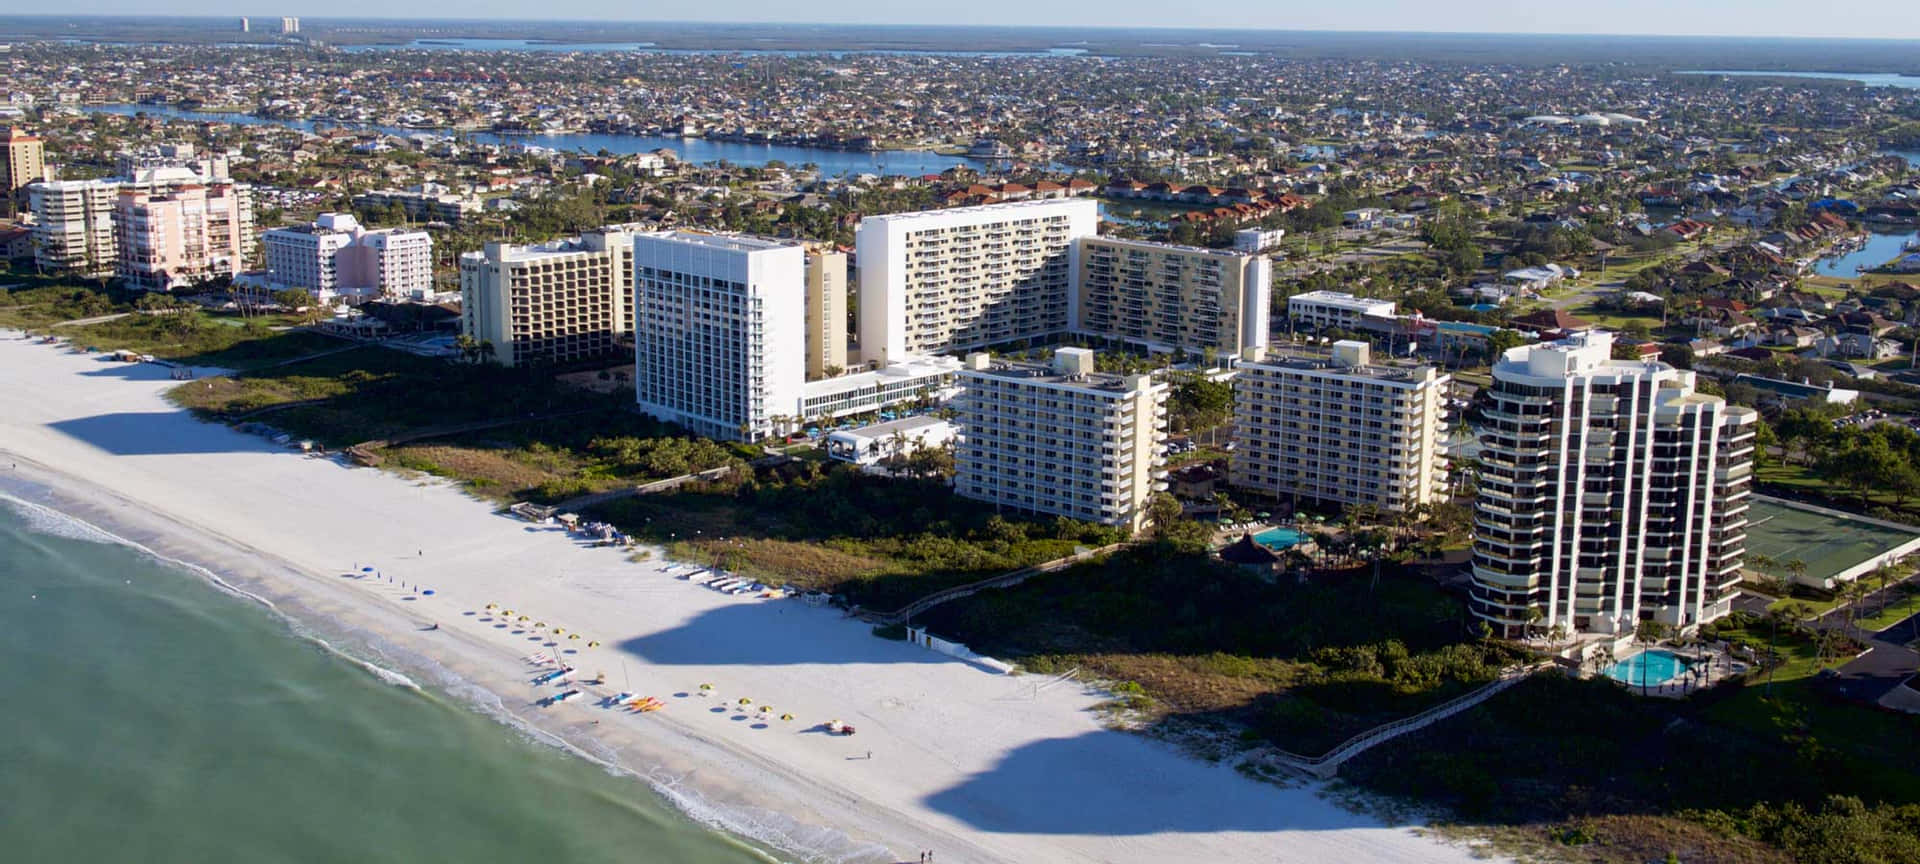 Explore the Natural Beauty of Marco Island